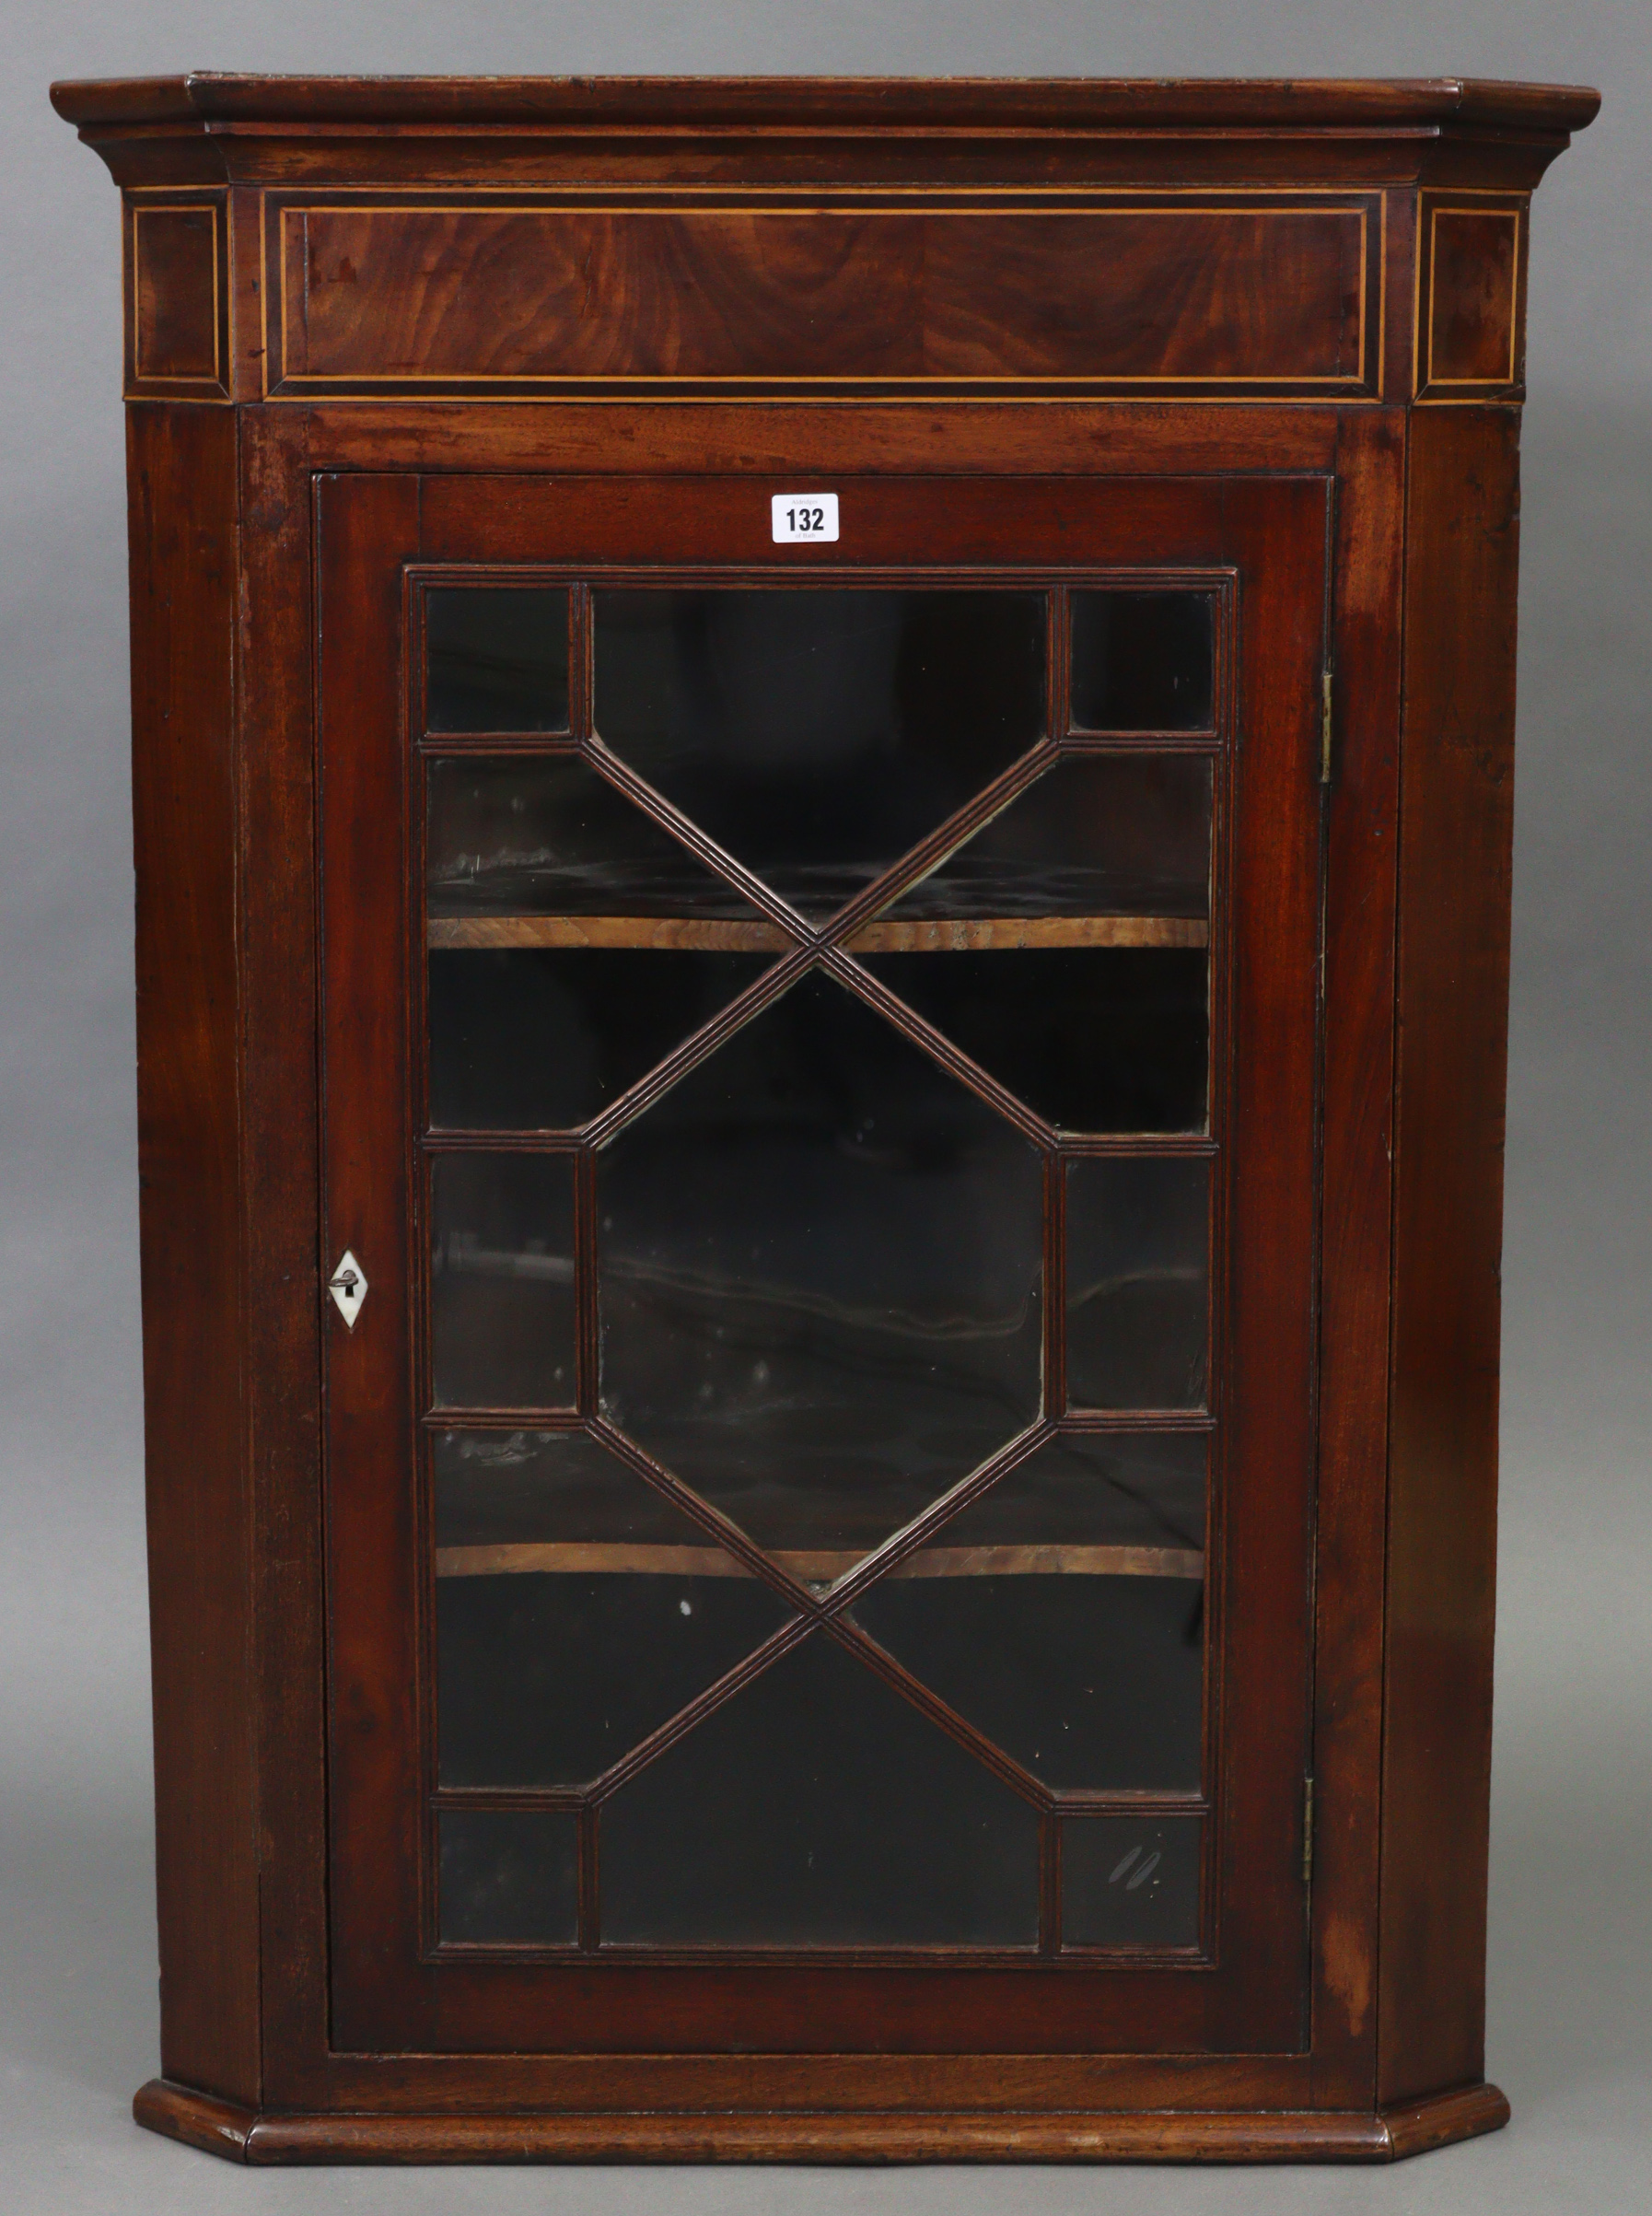 An early 19th century inlaid-mahogany hanging corner cabinet fitted two shaped shelves enclosed by a